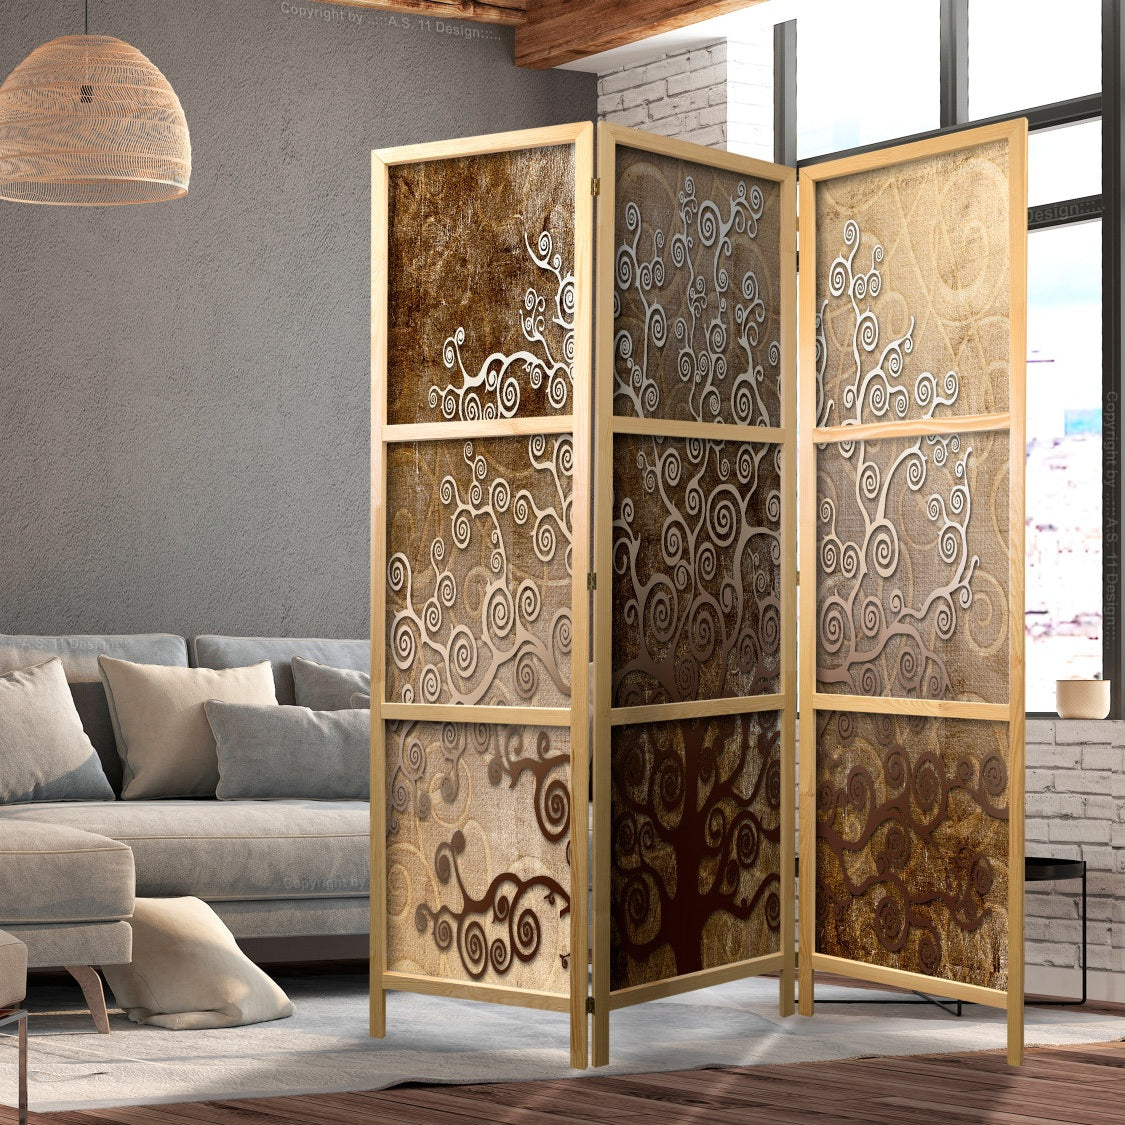 an abstract design (brown tree of life) in a canvas of a room divider screen in a living room